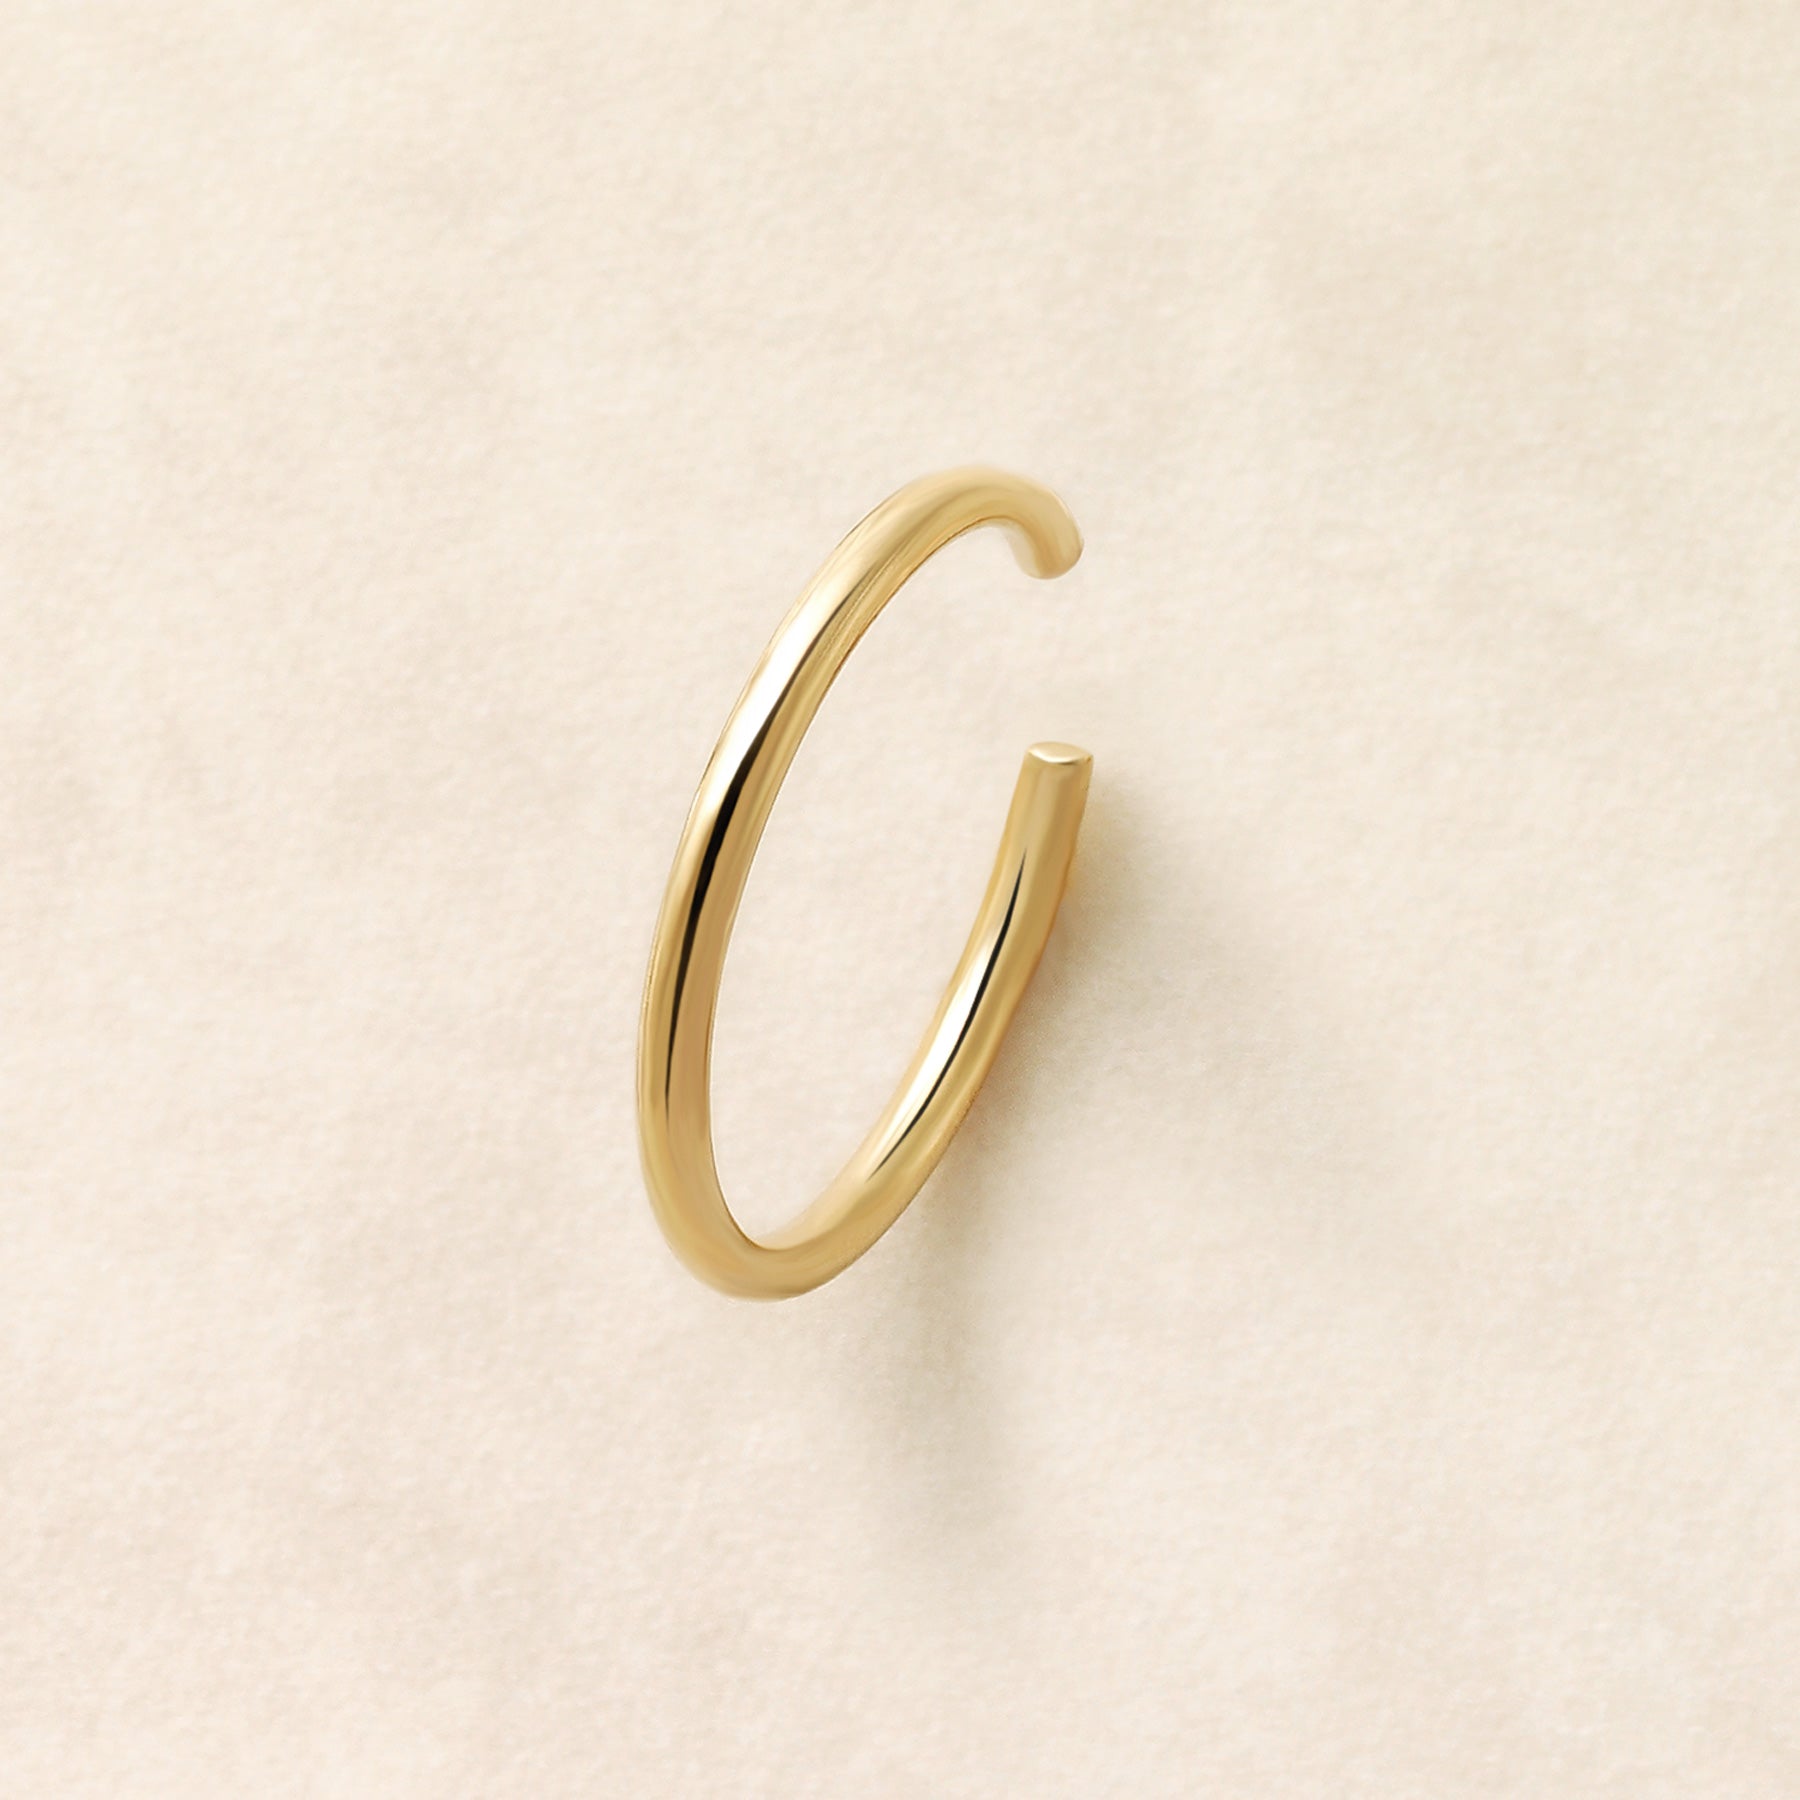 10K Yellow Gold Pipe Ear Cuff - Product Image